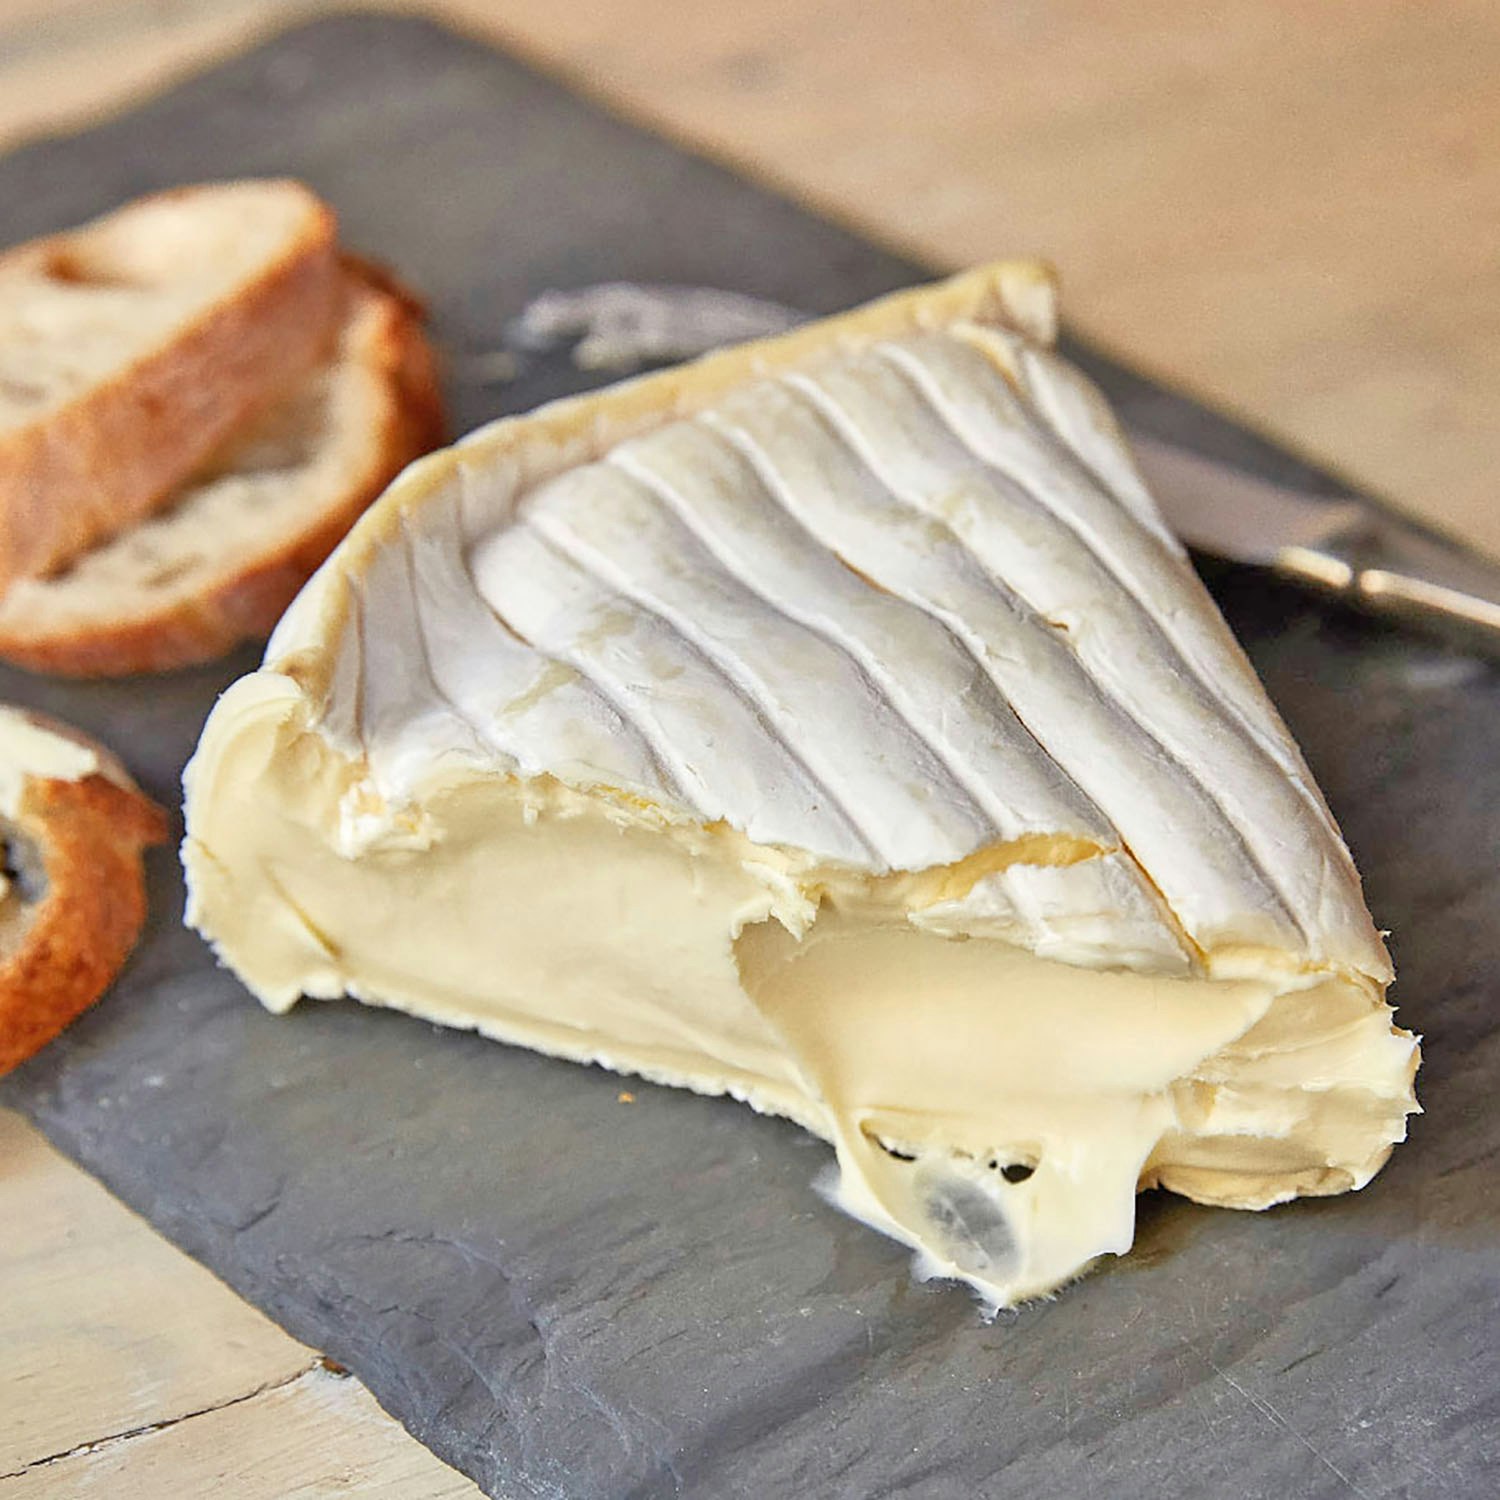 fromager d affinois cheese